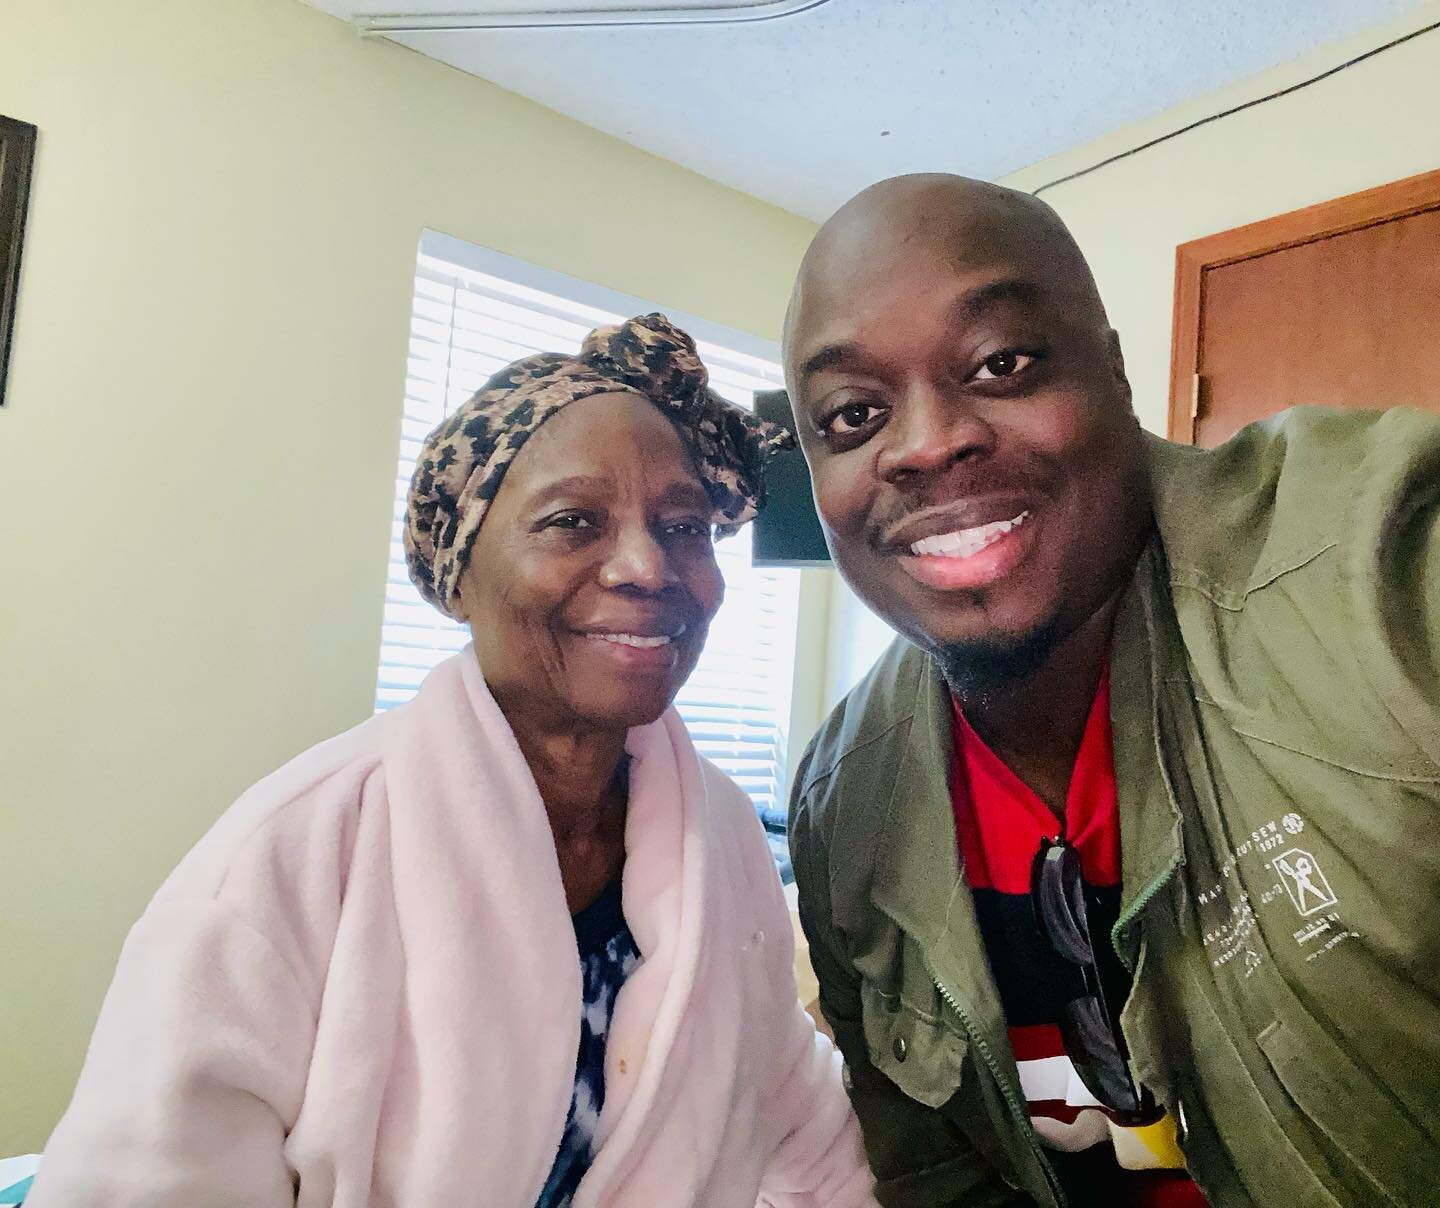 9 days ago my mother, Felicia Aryee went home to Heaven. Her 6 and a half year battle with cancer took a turn for the worse 2 days after my wife&rsquo;s own mother died on March 15th of this year. I spent the next 5 months flying back and forth to Te